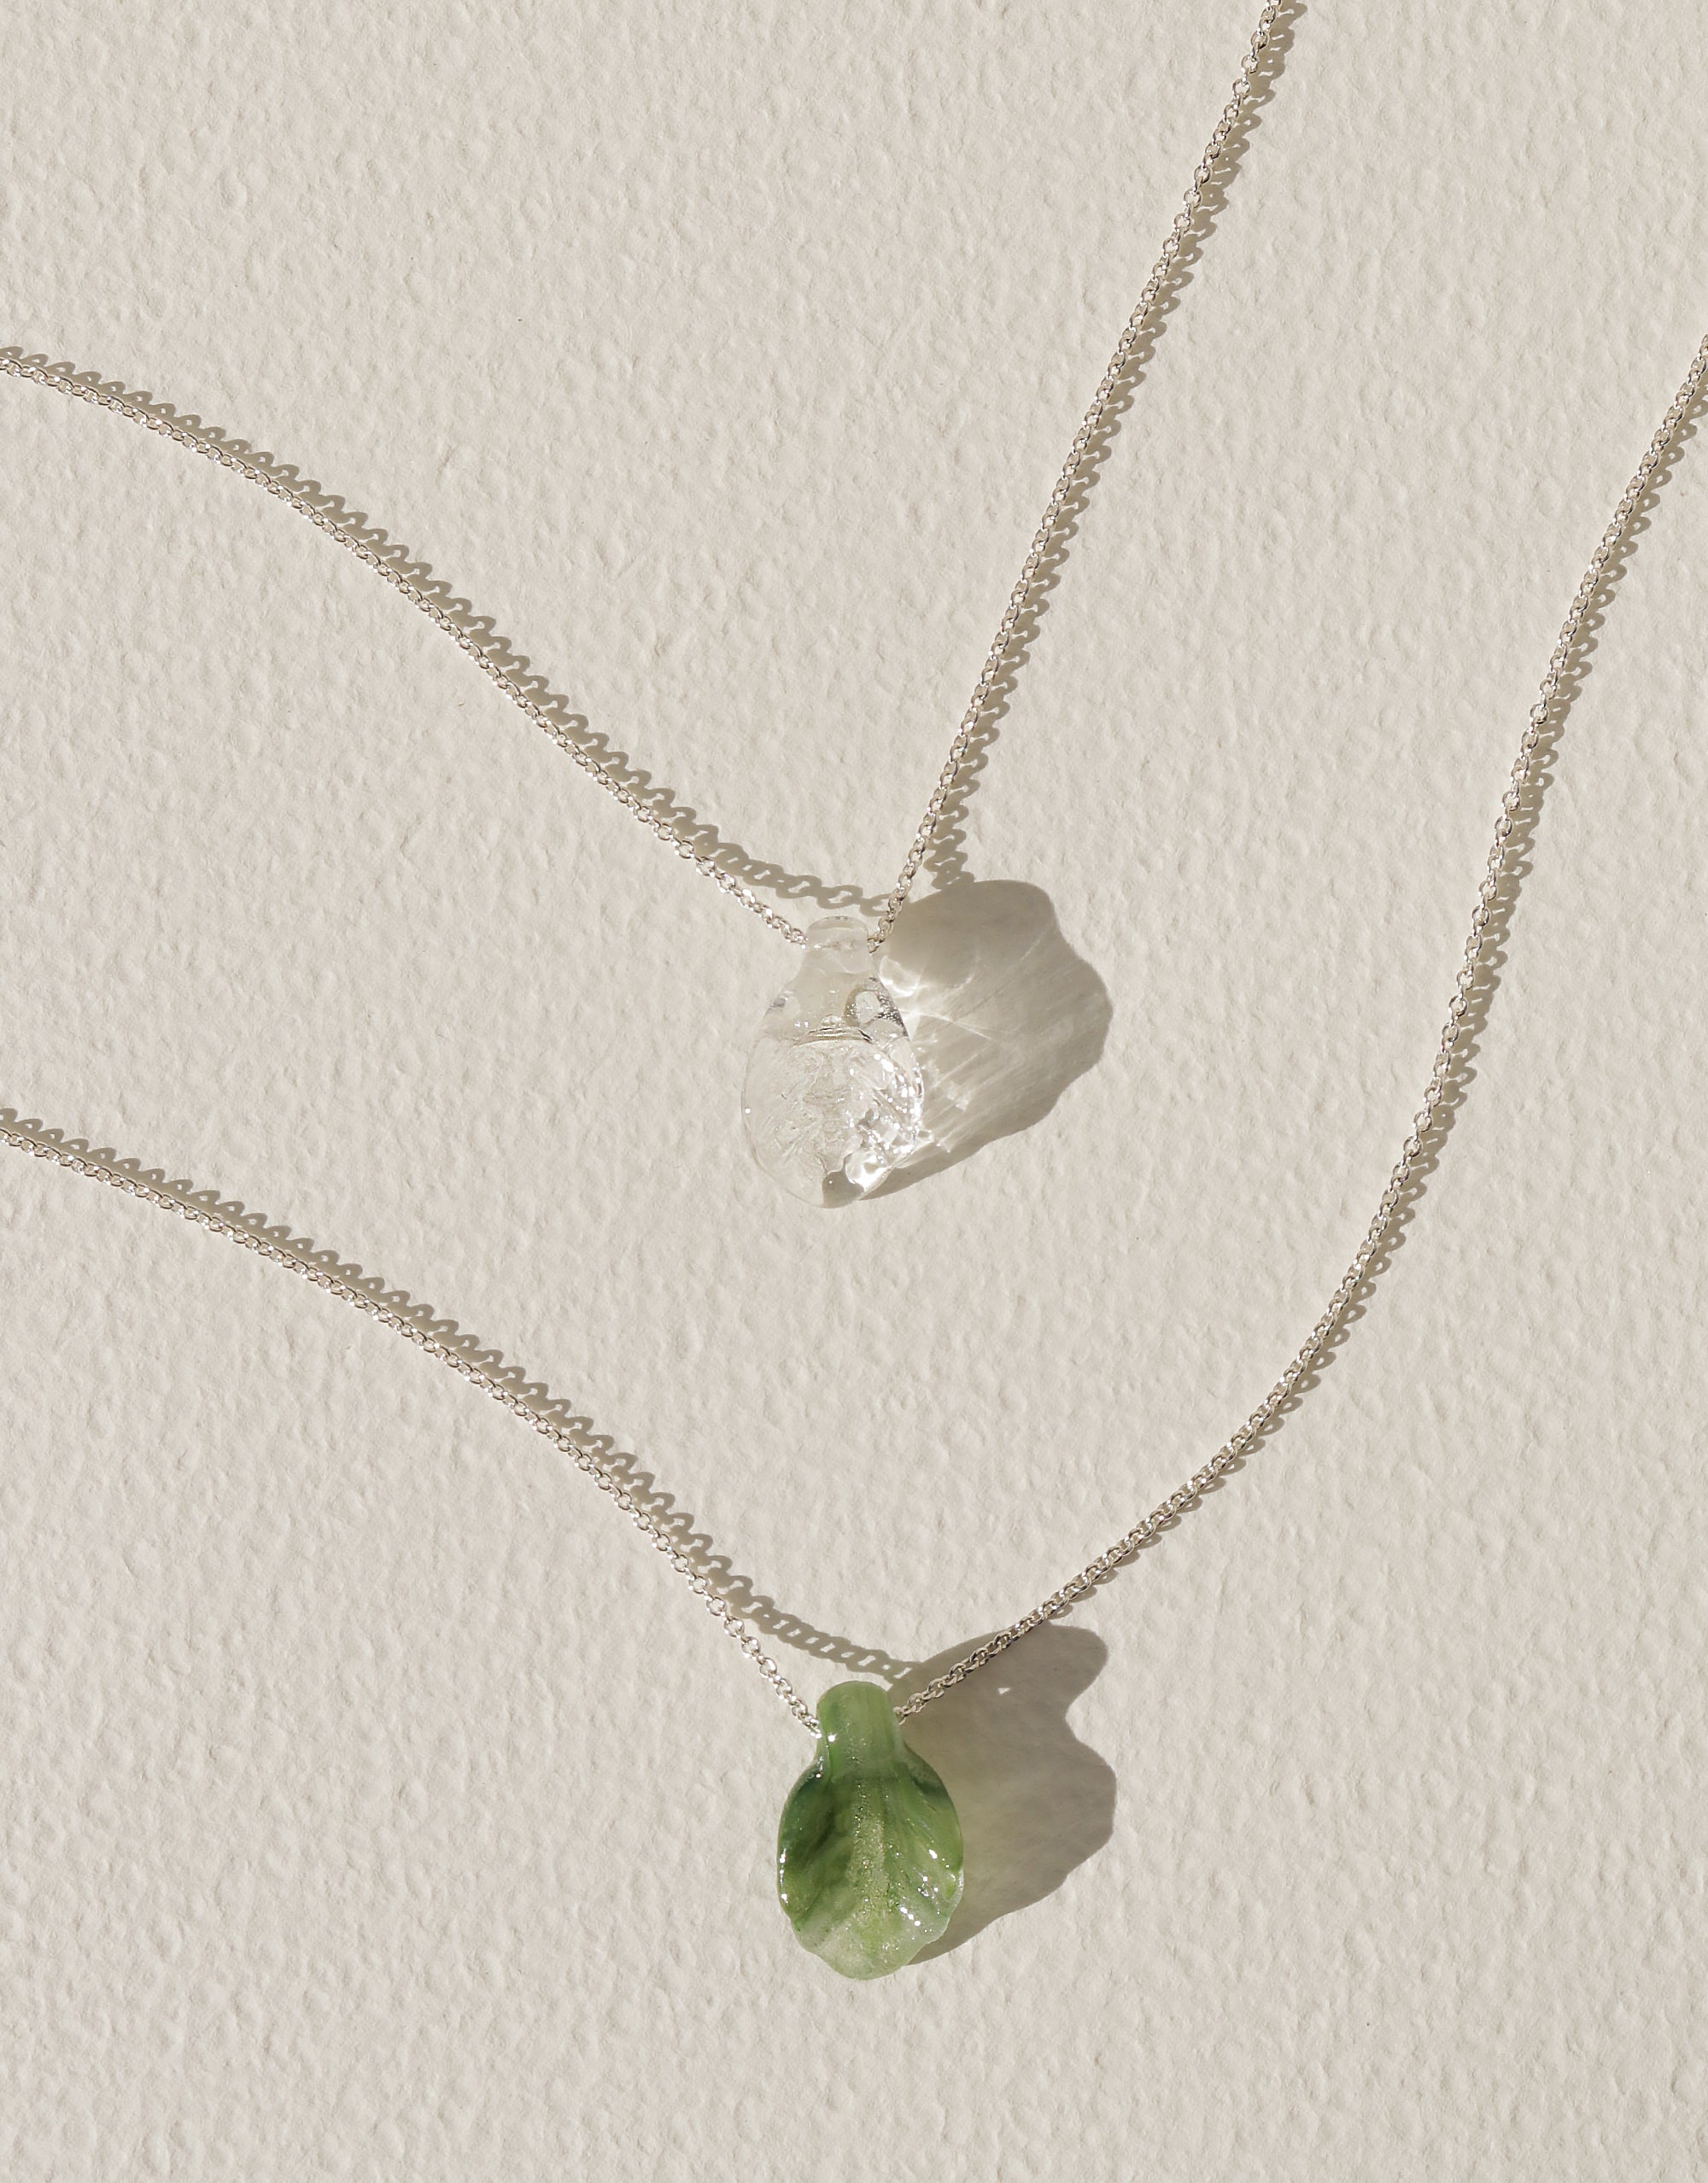 Leaf Necklace | NOTO x CLED Earth Day